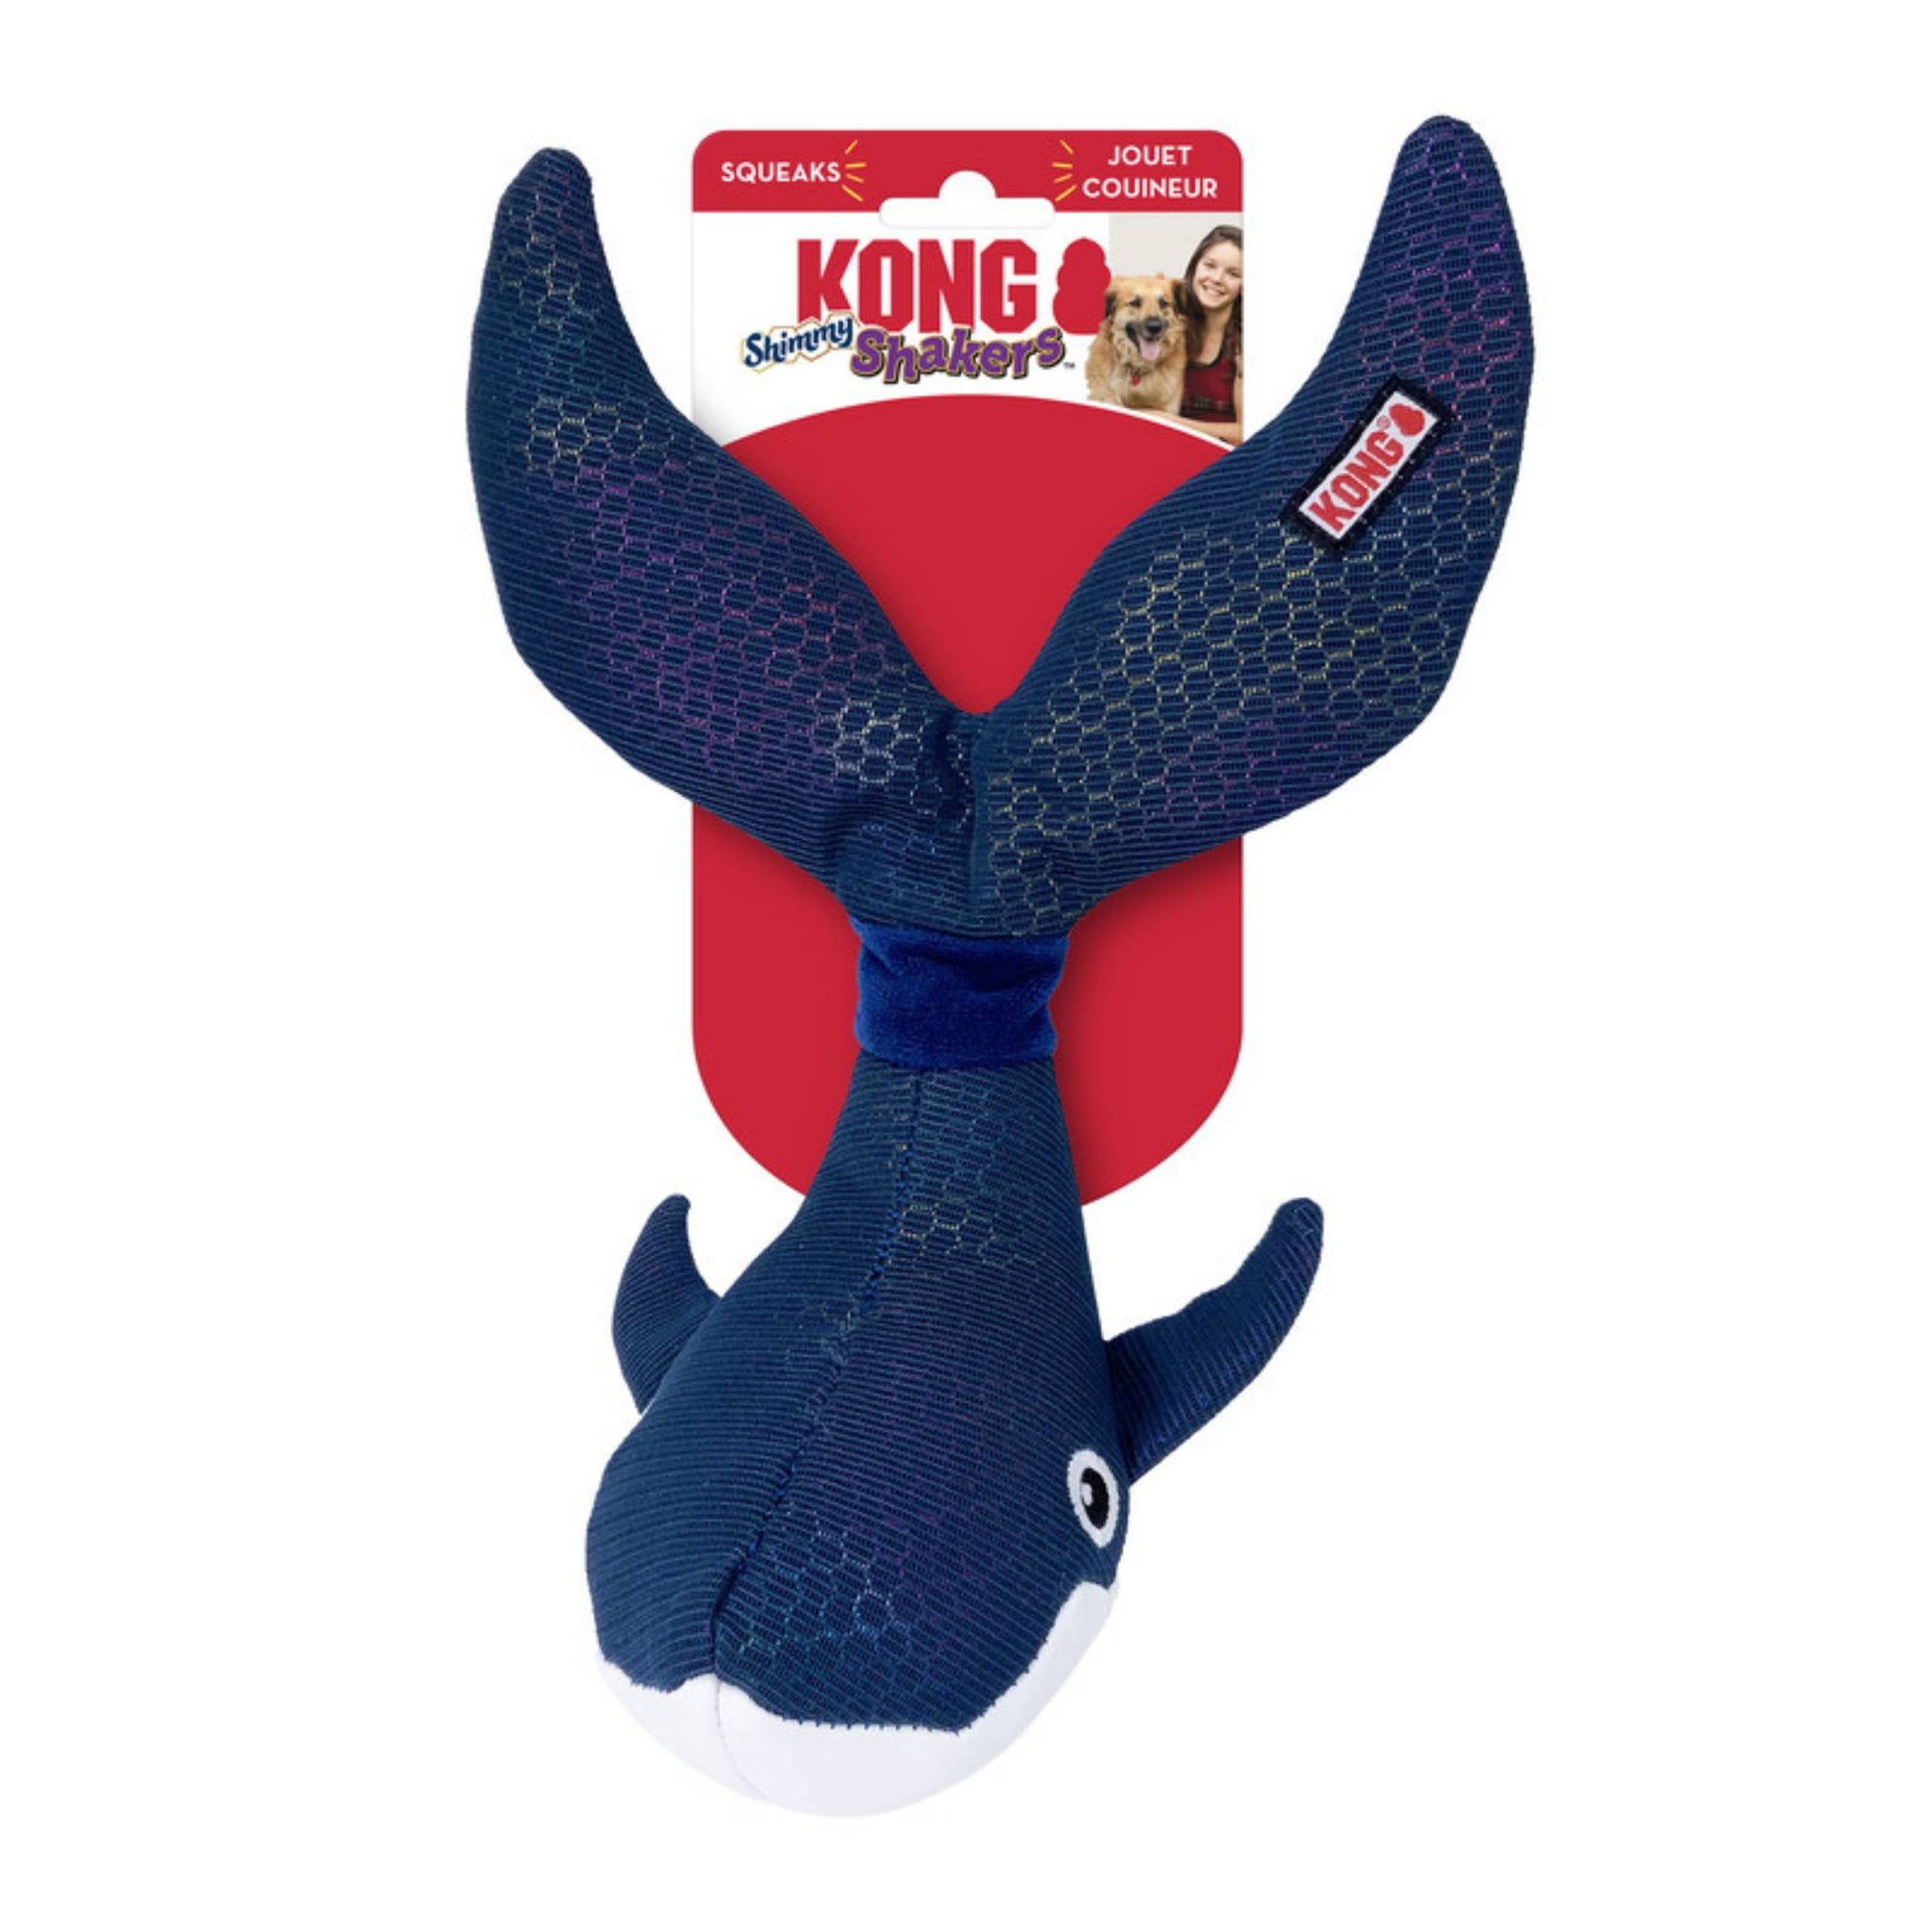 Kong shakers shimmy whale dog toy with package